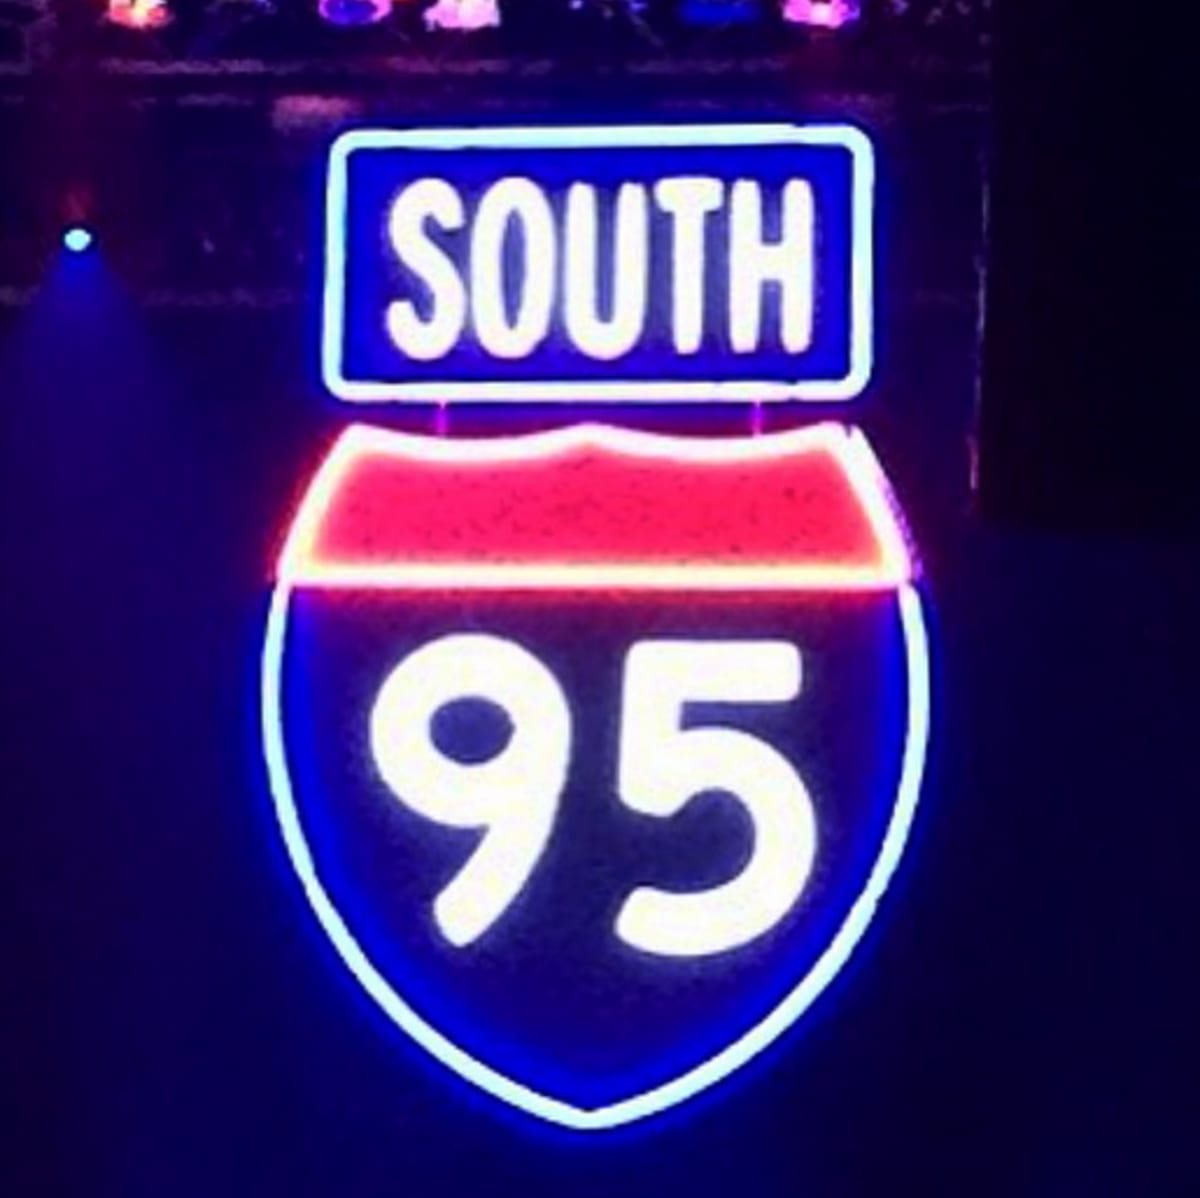 Here's The Story Behind Jay Z's "95 South" Song That We've Never Heard